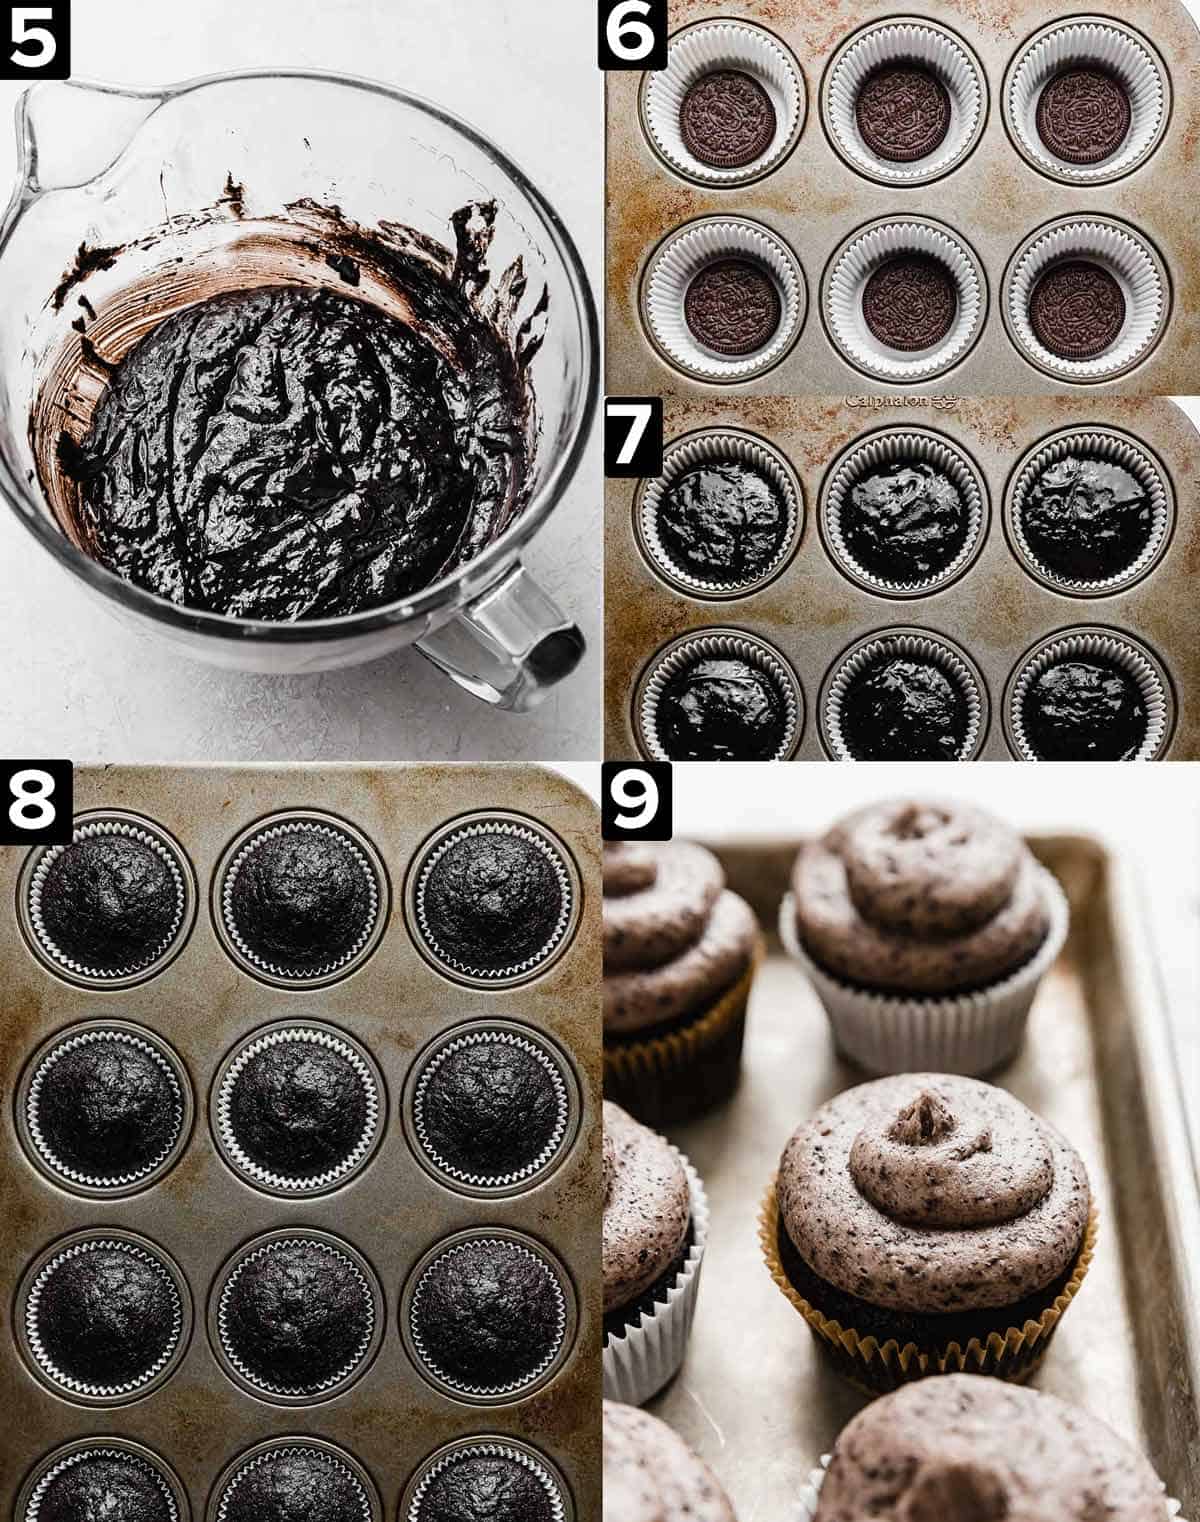 Five images showing Oreo Cupcake batter, then Oreo cupcakes in a cupcake pan, and then fully baked and frosted Oreo Cupcakes.